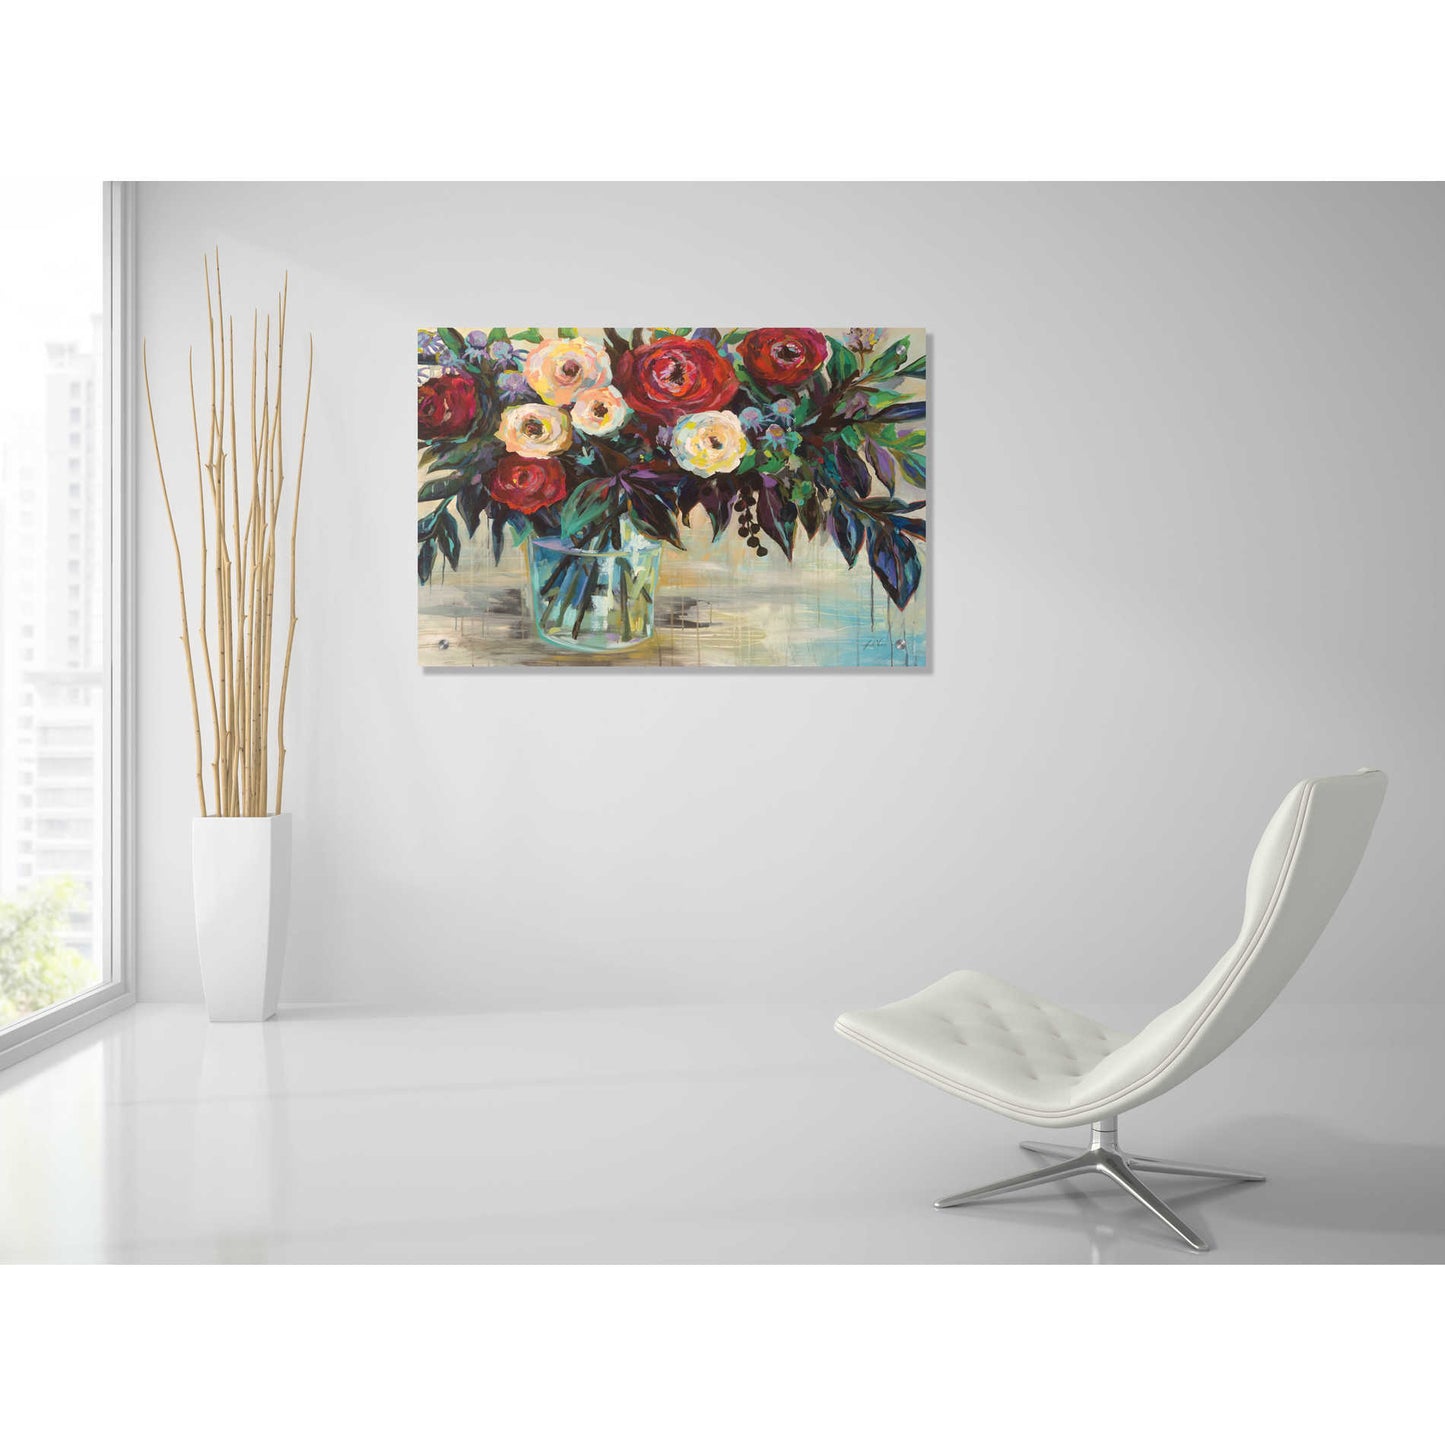 Epic Art 'Winter Floral Crop' by Jeanette Vertentes, Acrylic Glass Wall Art,36x24